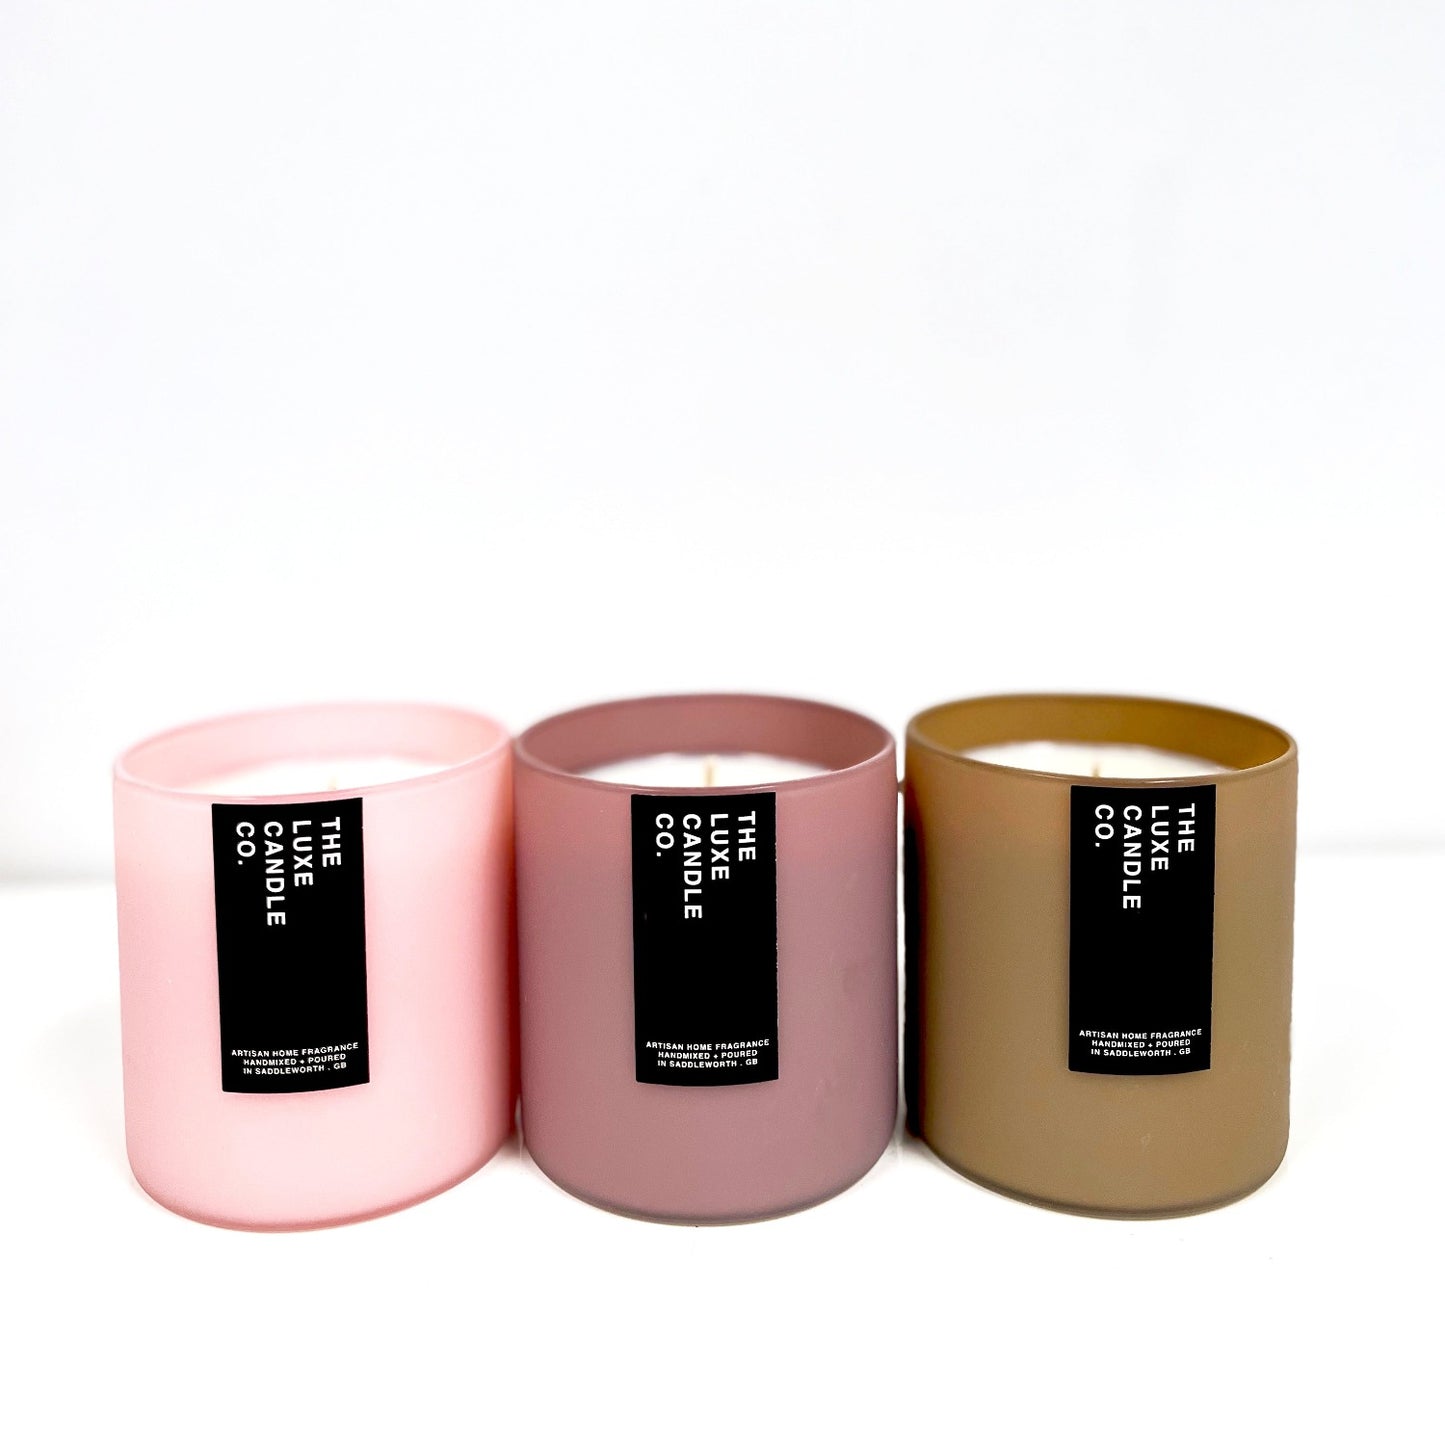 Vetiver fragranced soy wax candles. Soy wax vetiver candle